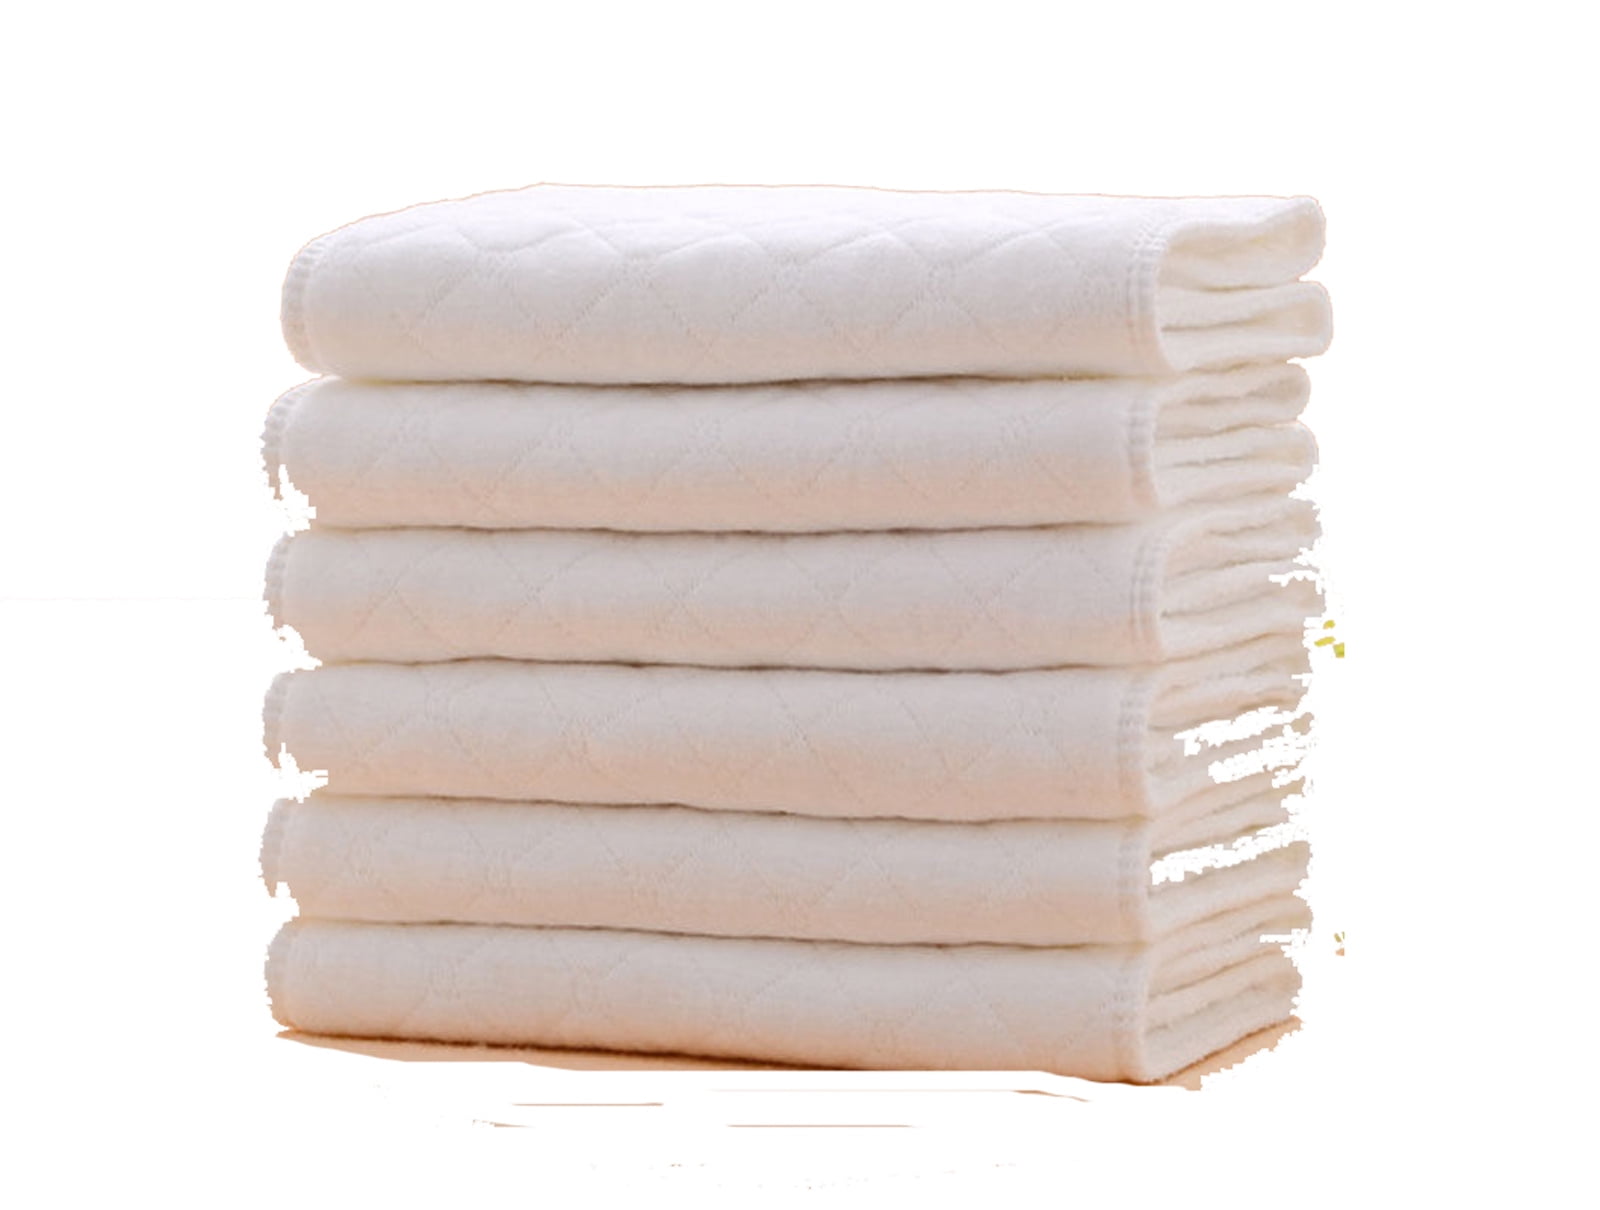 Baby Nappy 10 Pcs Thermal Reusable Modern Diapers Lined Insert 3 Layers Cotton White White, 3212cm